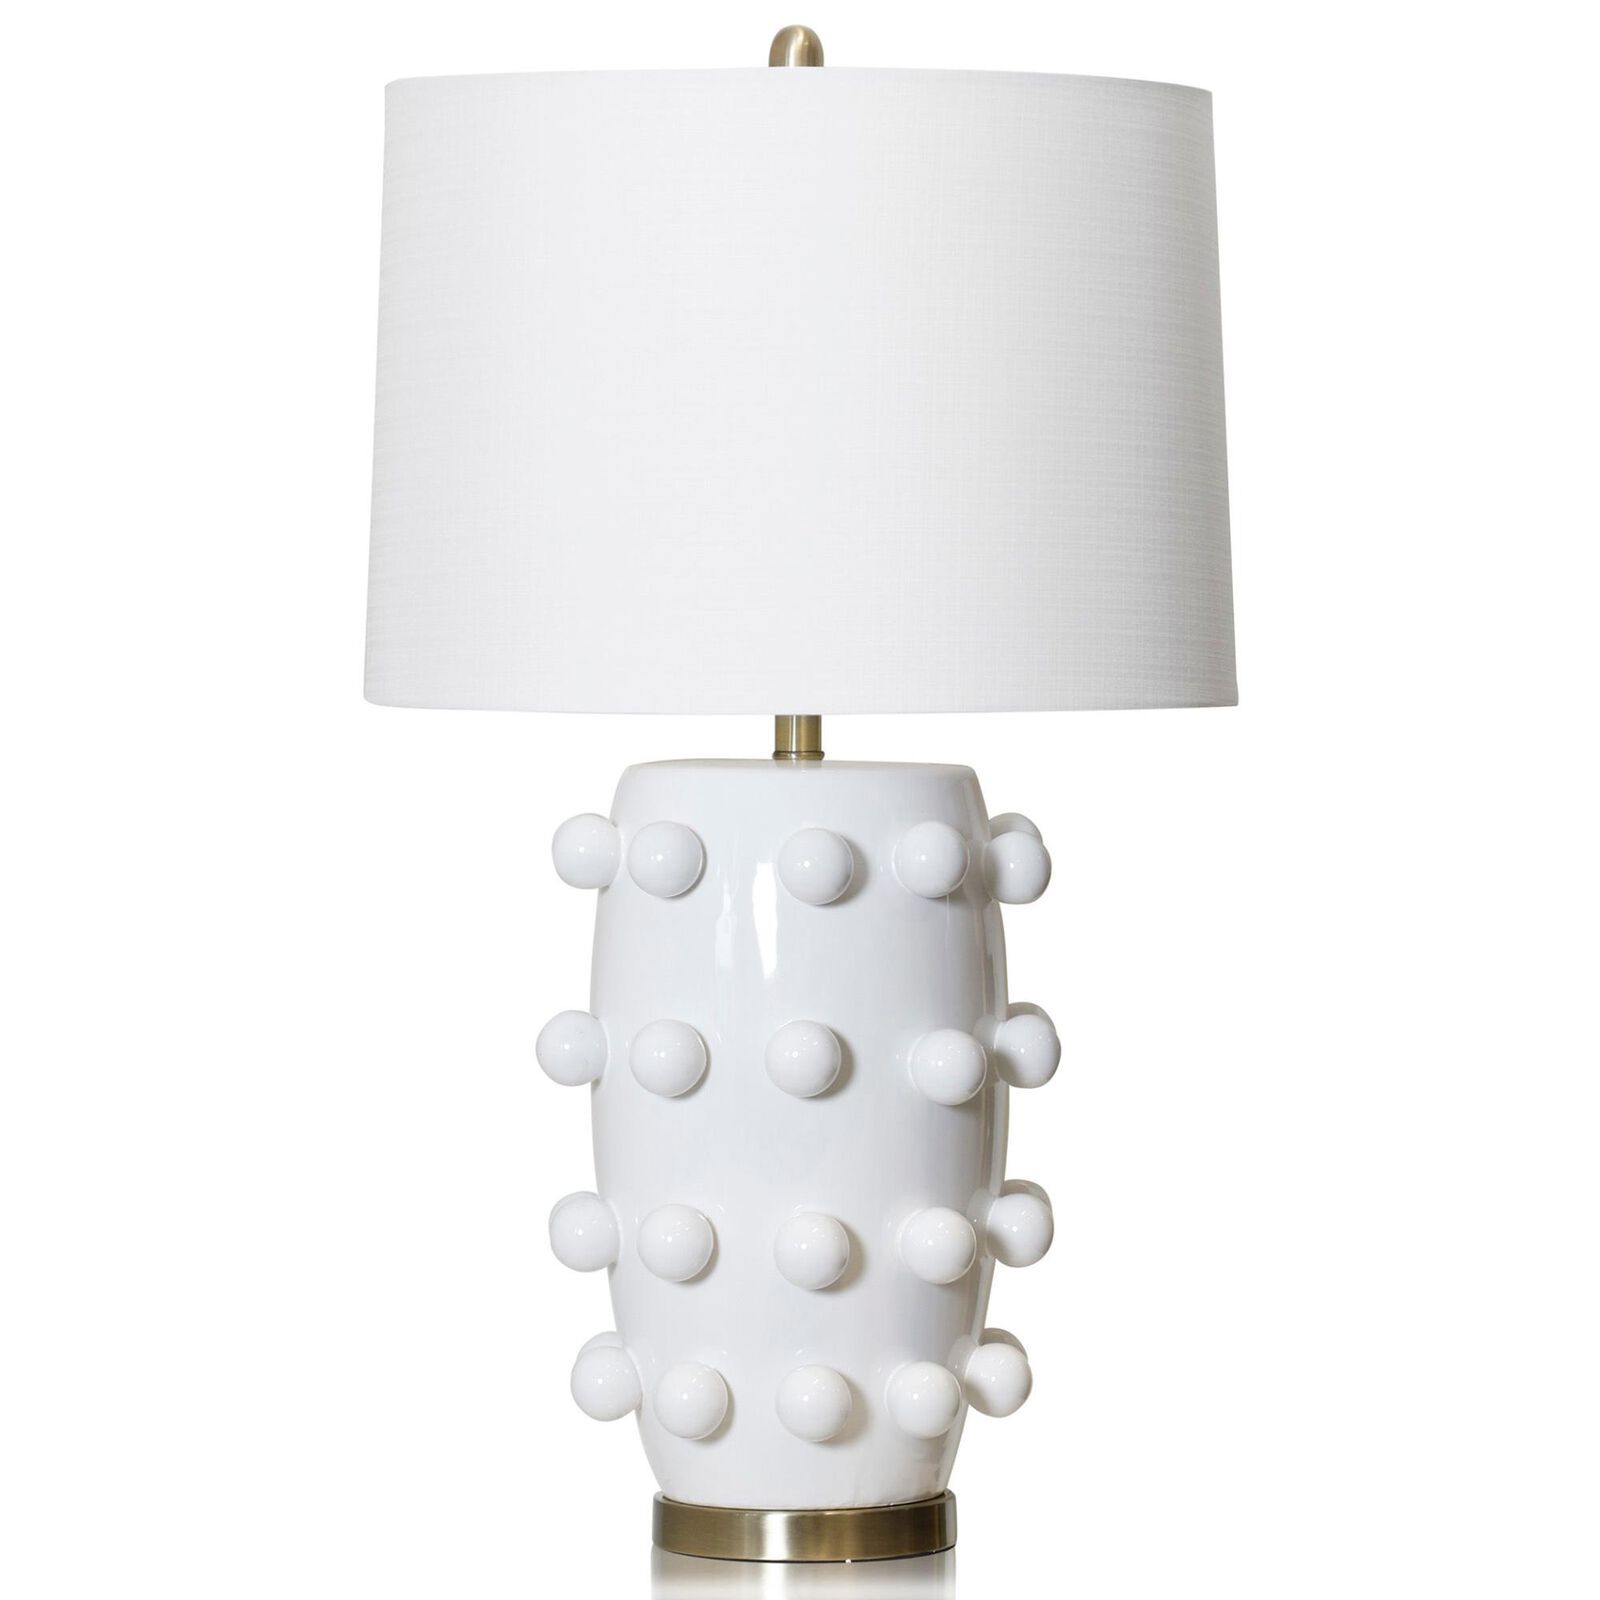 Marni 30 Inch Table Lamp by Harp and Finial | 1800 Lighting